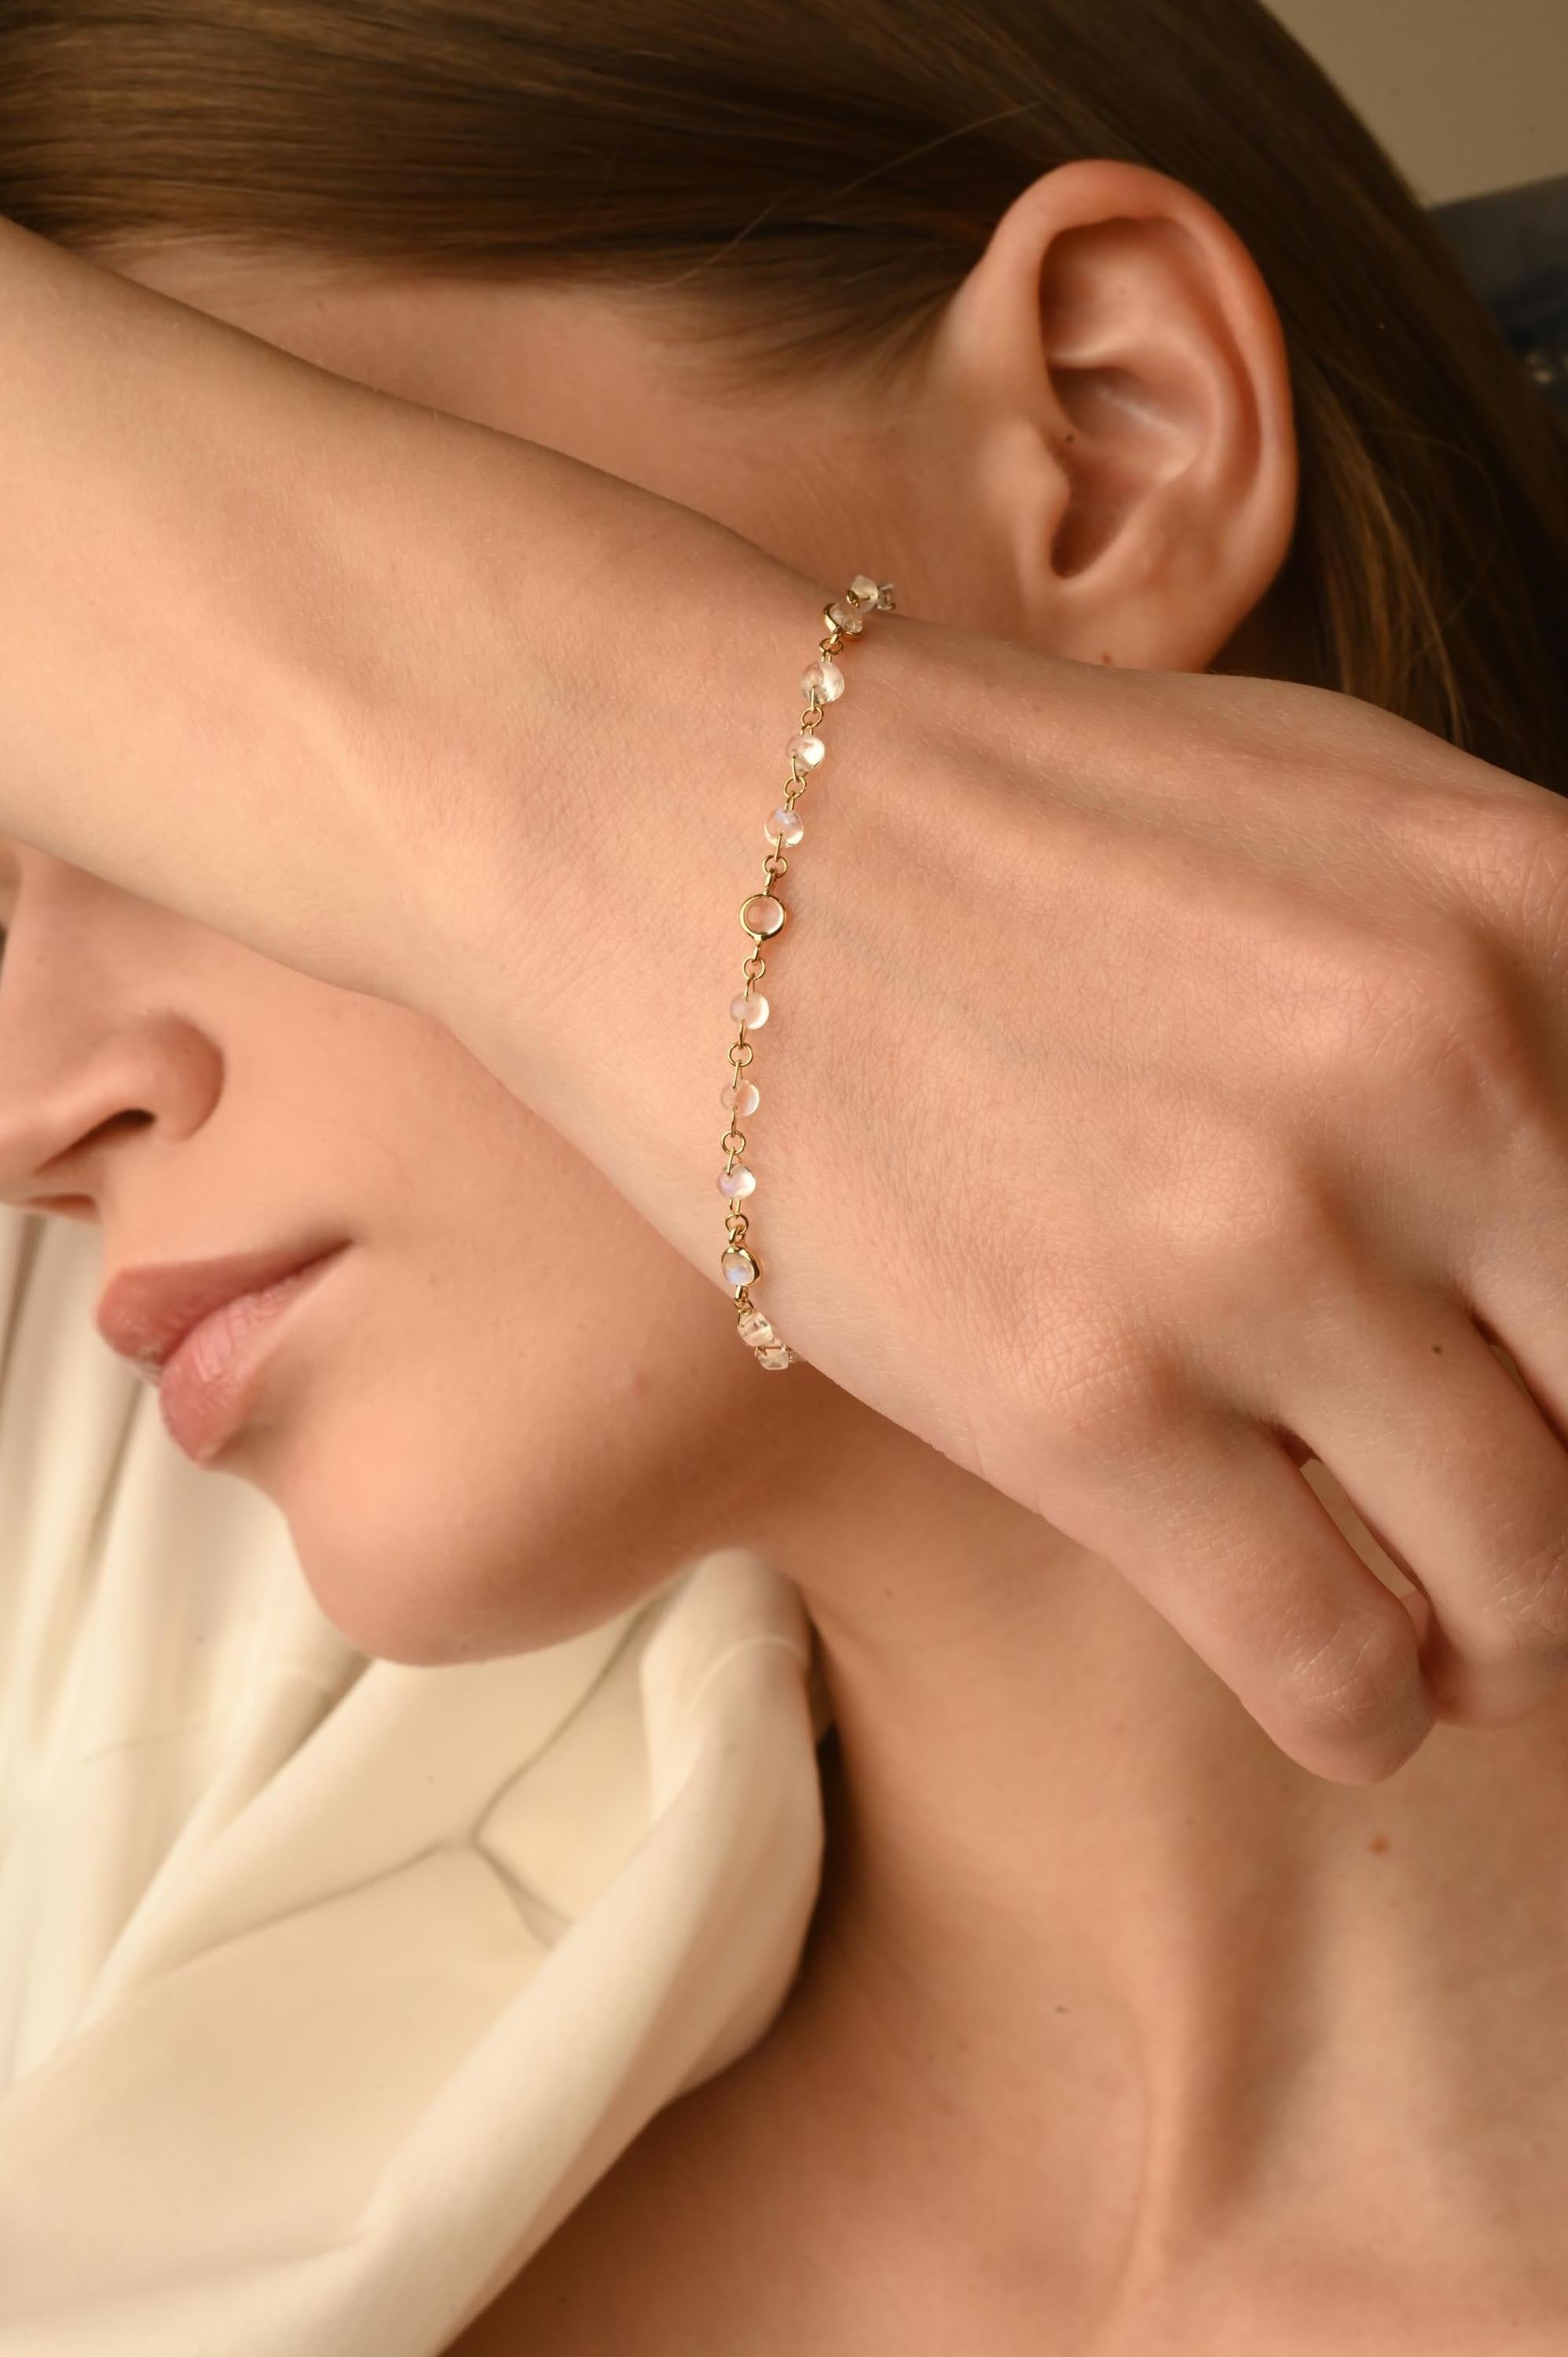 This 6.29 Carat Rainbow Moonstone Chain Bracelet in 18K gold showcases 6.29 carats endlessly sparkling natural rainbow moonstone. It measures 7.5 inches long in length. 
Rainbow moonstone can help you attract the right people into your life if you